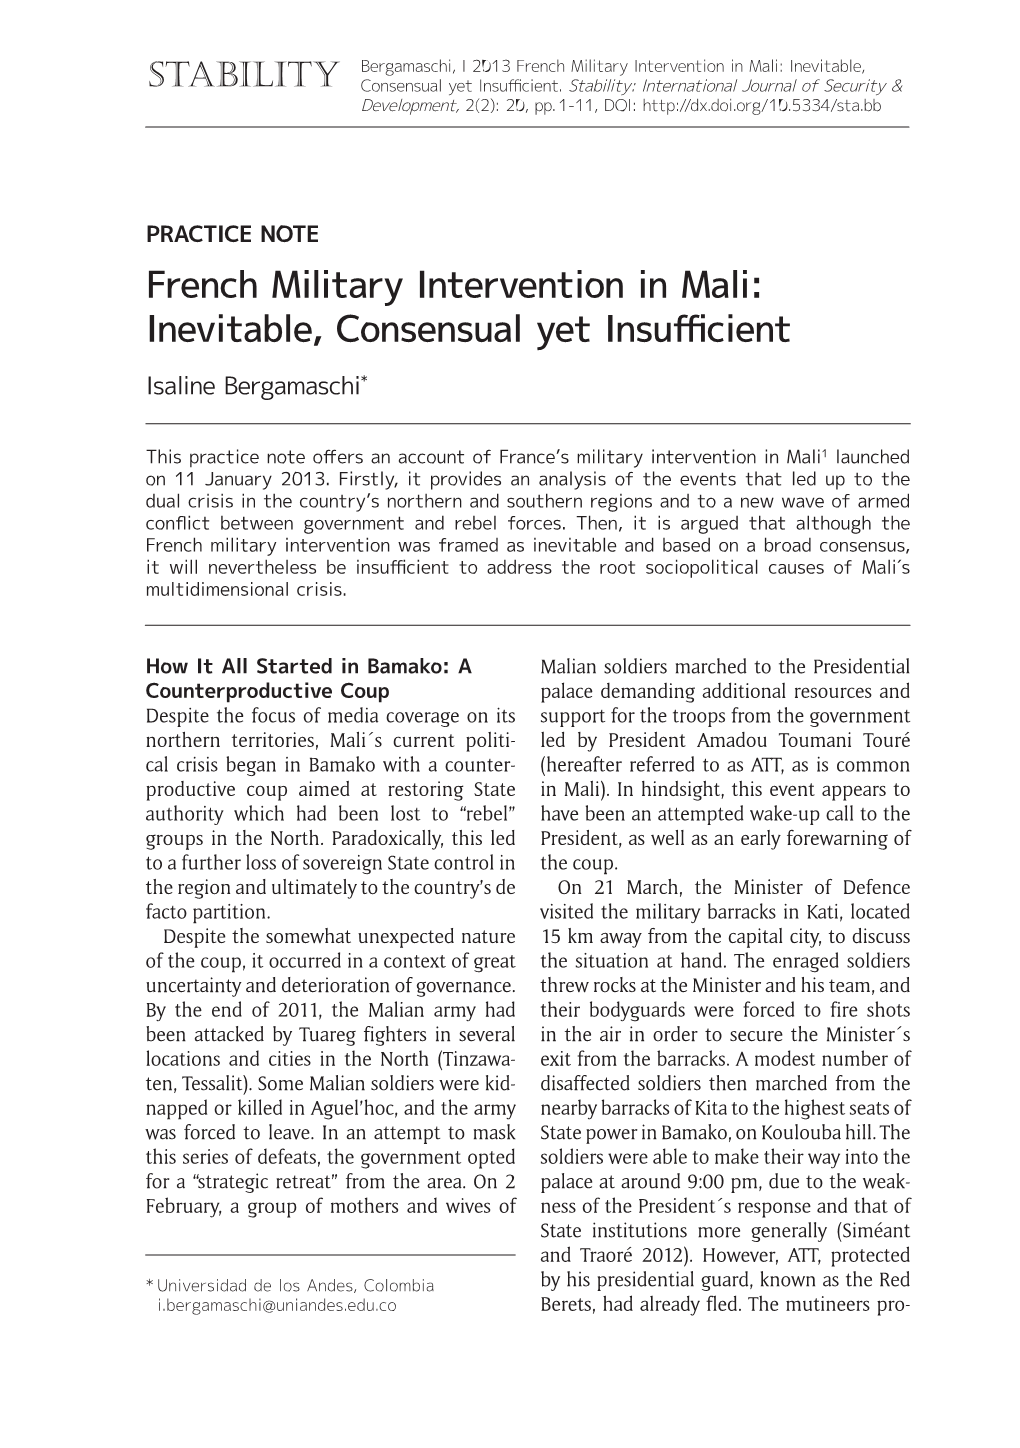 French Military Intervention in Mali: Inevitable, Stability Consensual Yet Insufficient.Stability: International Journal of Security & Development, 2(2): 20, Pp